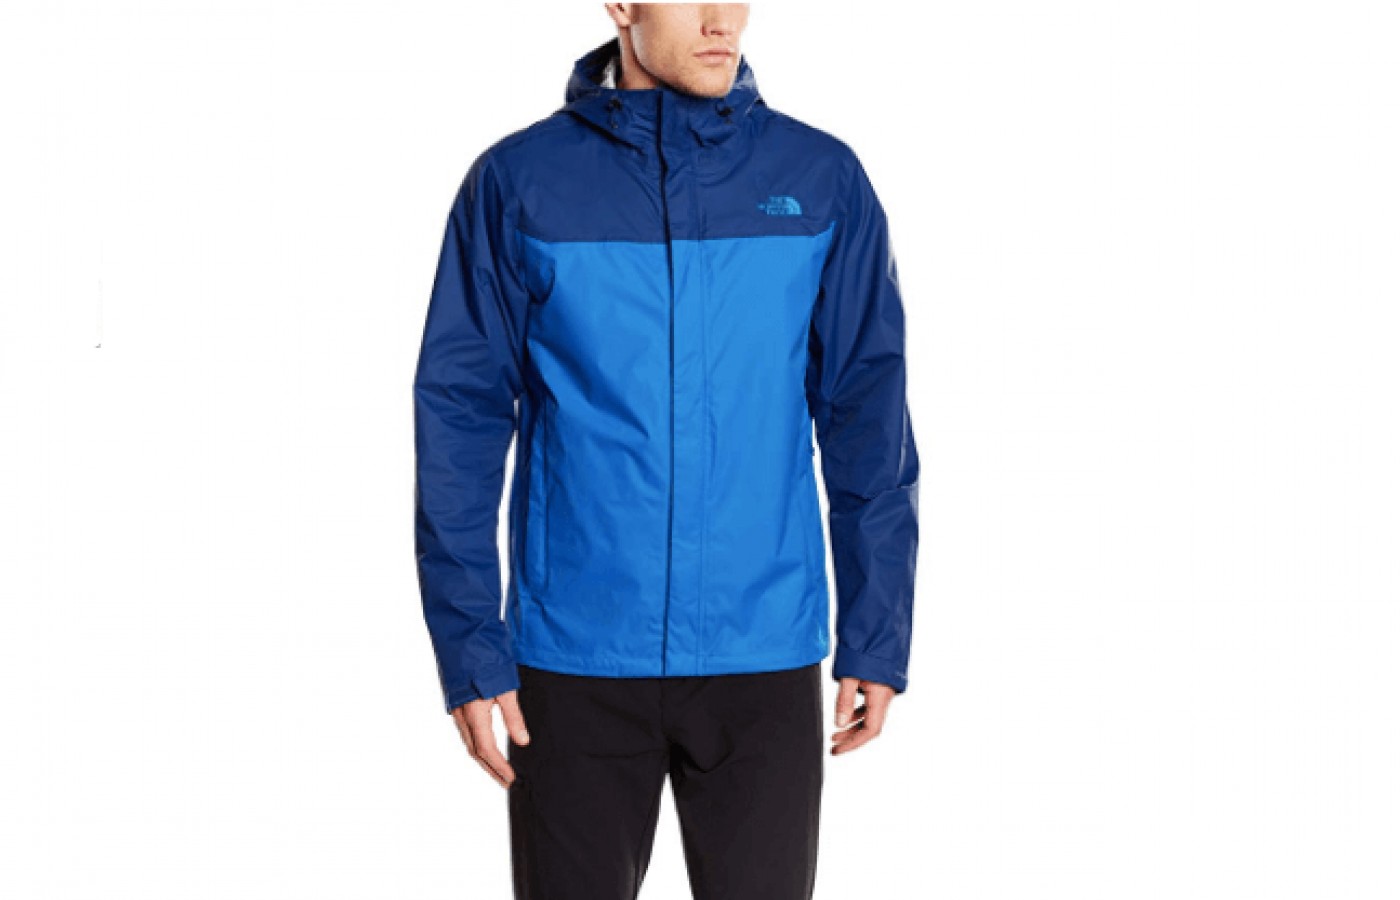 North Face Venture Jacket Reviewed GearWeAre